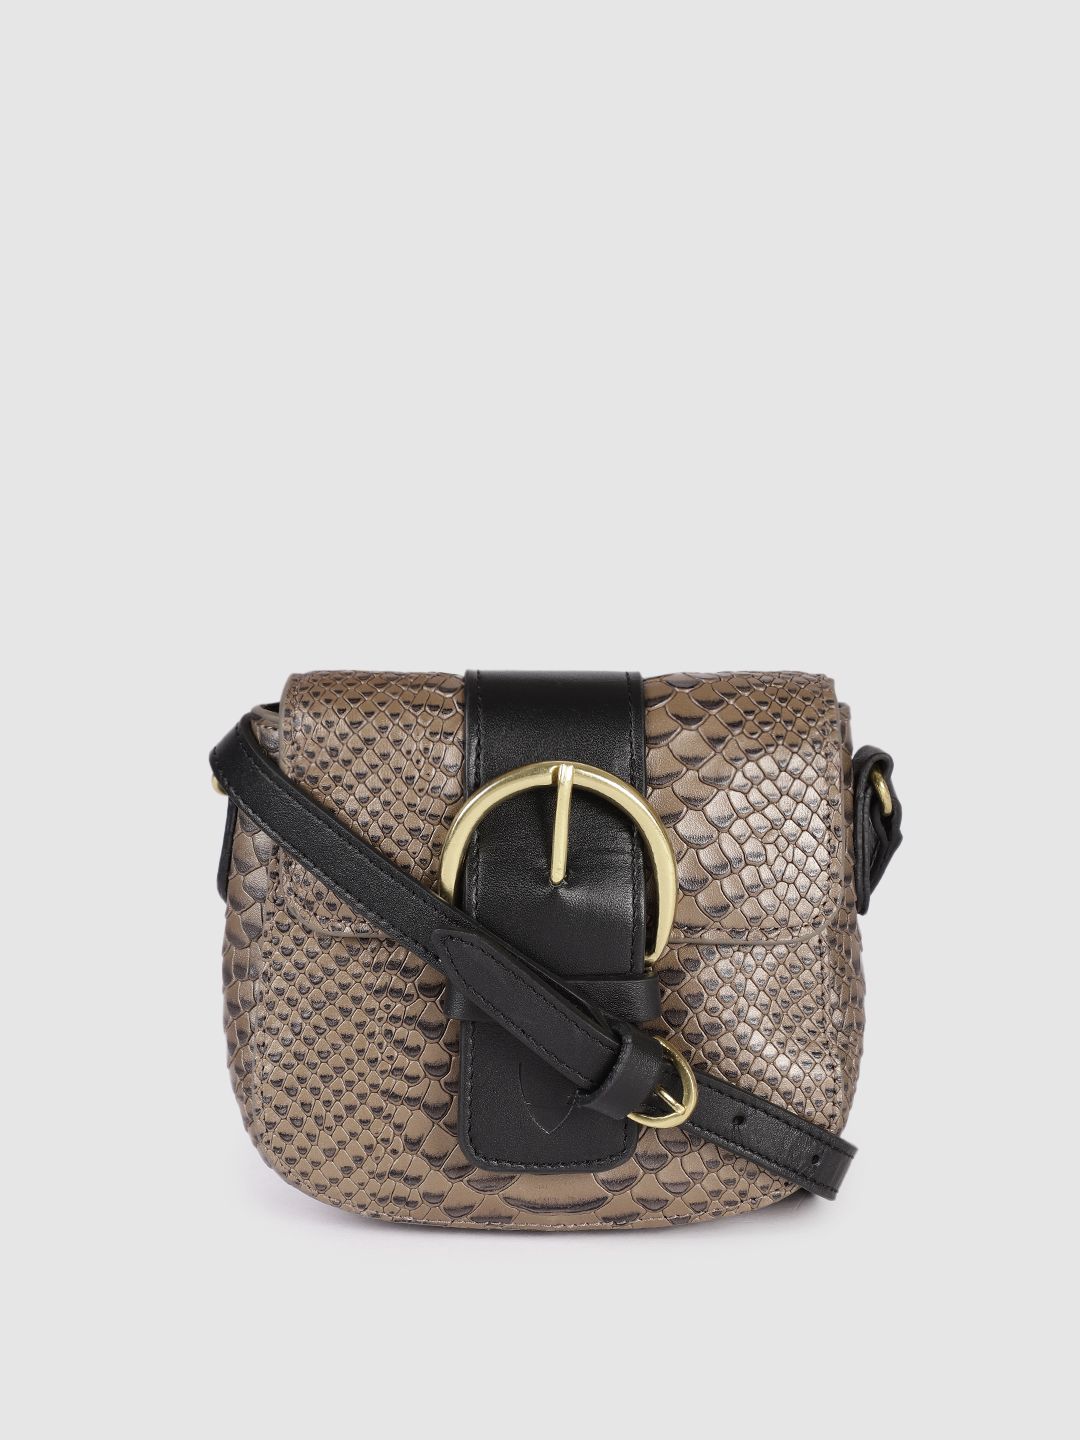 Hidesign Gunmetal-Toned Textured Leather Structured Sling Bag Price in India